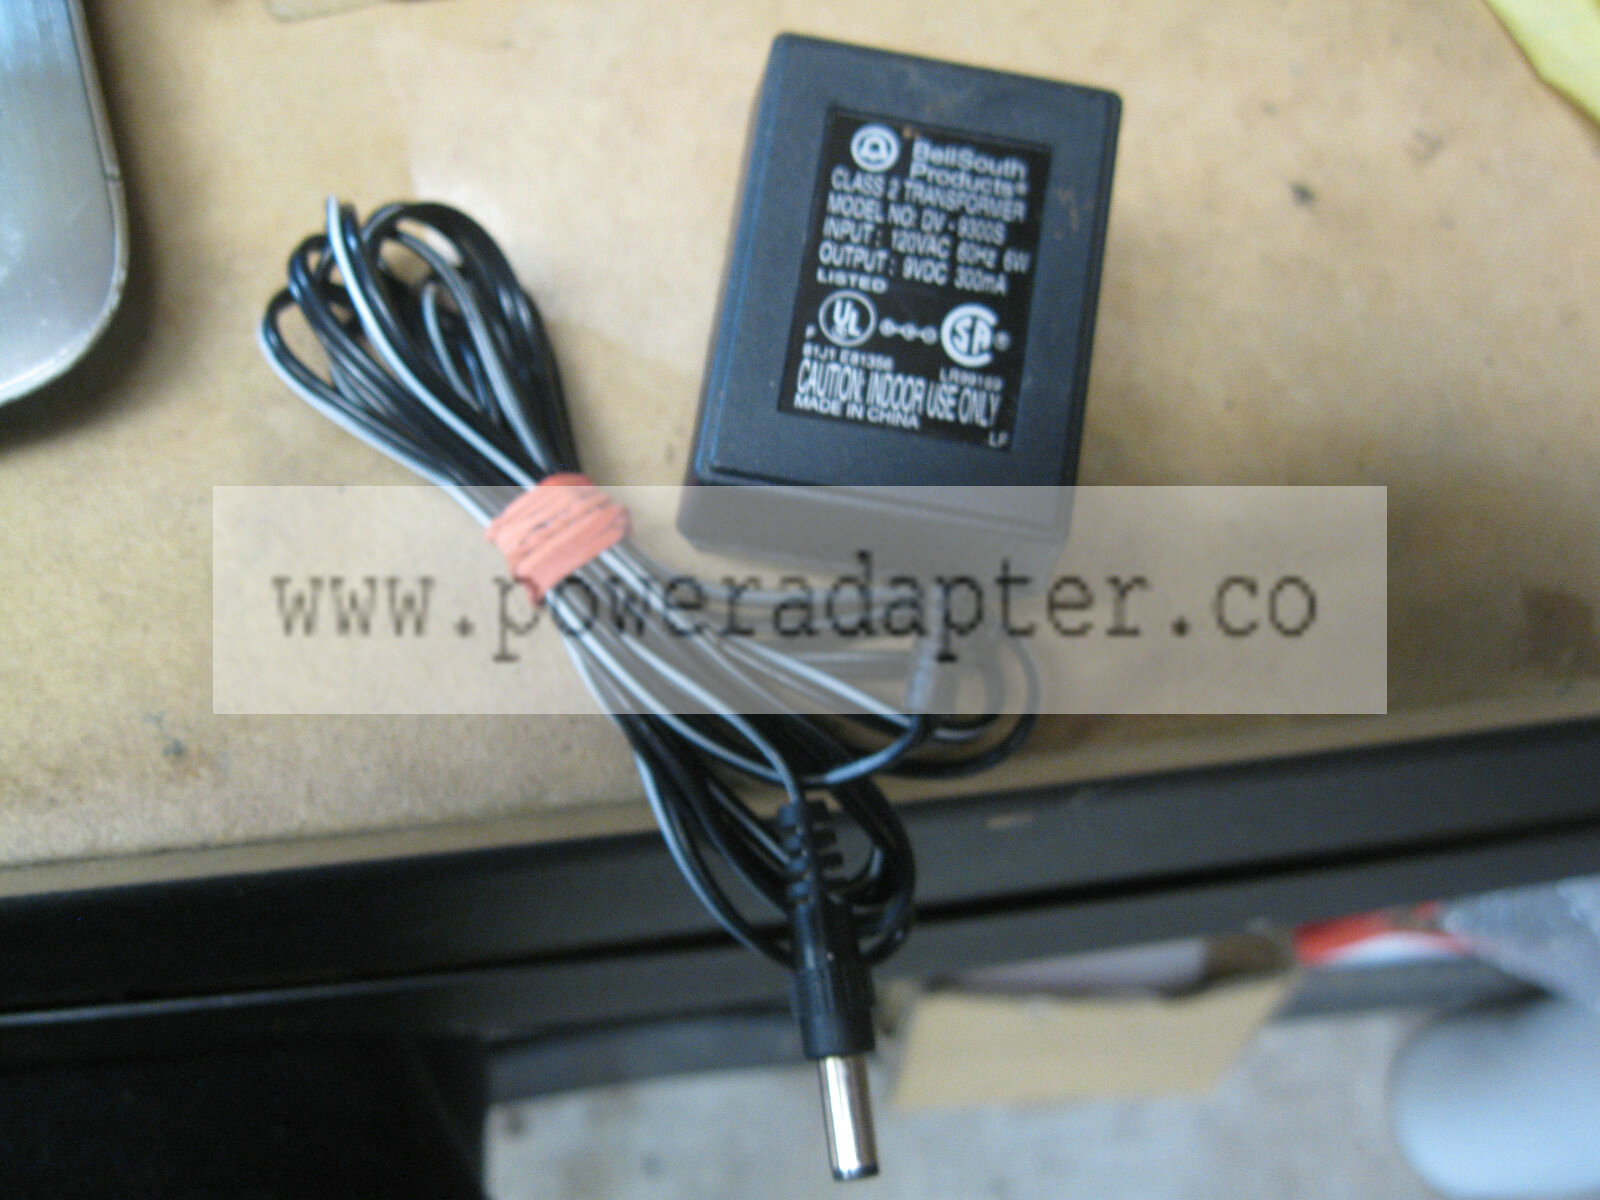 AC ADAPTER POWER SUPPLY 9 VDC 300MA BELLSOUTH BELL DV-9300S BELL SOUTH POWER SUPPLY TRANSFORMER DV-9300S INPUT 1